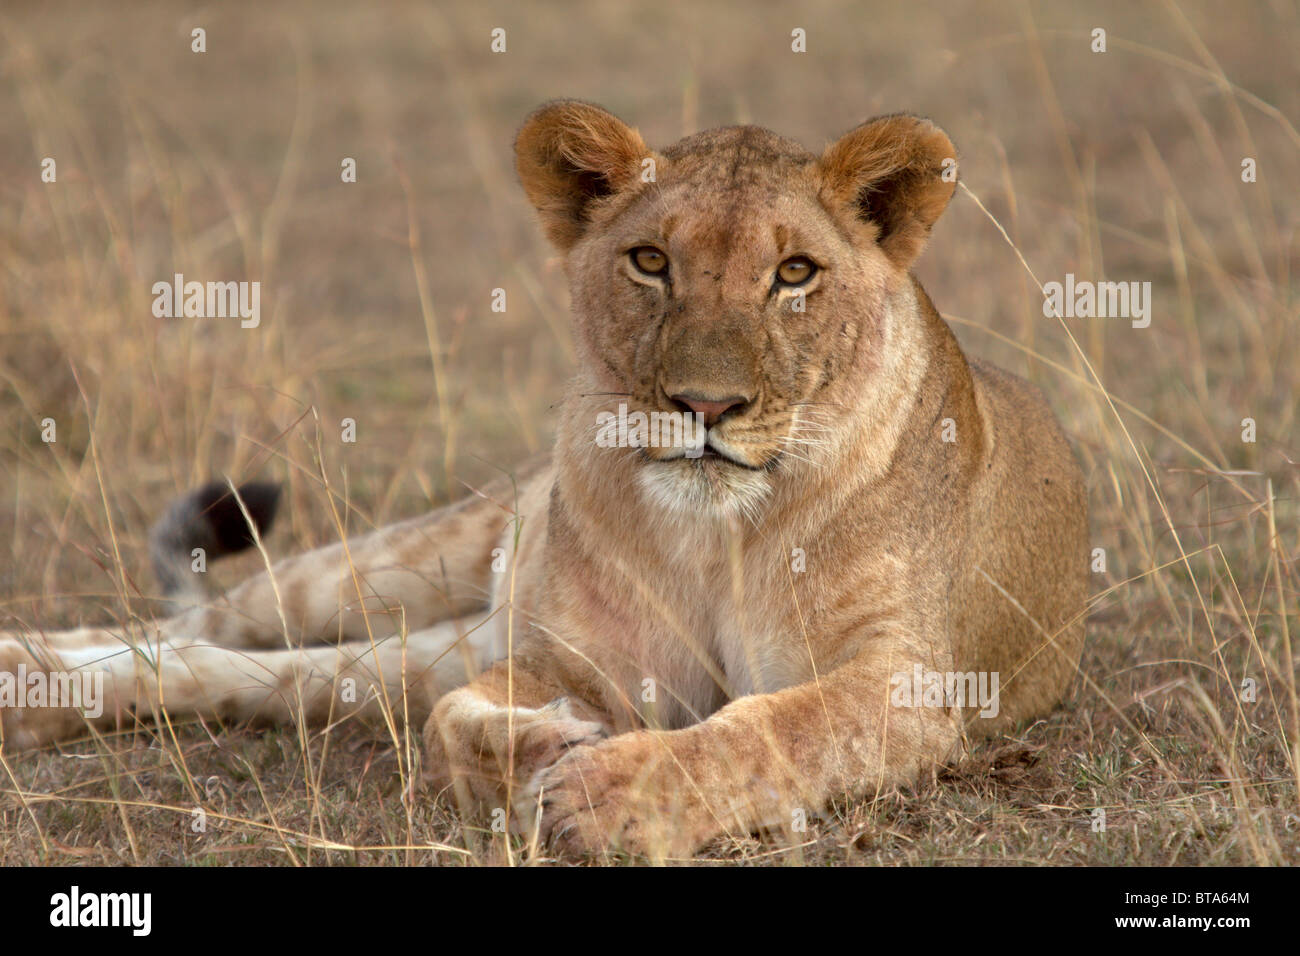 Framed in the wisps of the Mara grasslands, I stumbled upon this lioness basking in the soft sunlight. Undeterred by my presence, I was able to capture the moment I saw eye to eye with an African lioness. Stock Photo